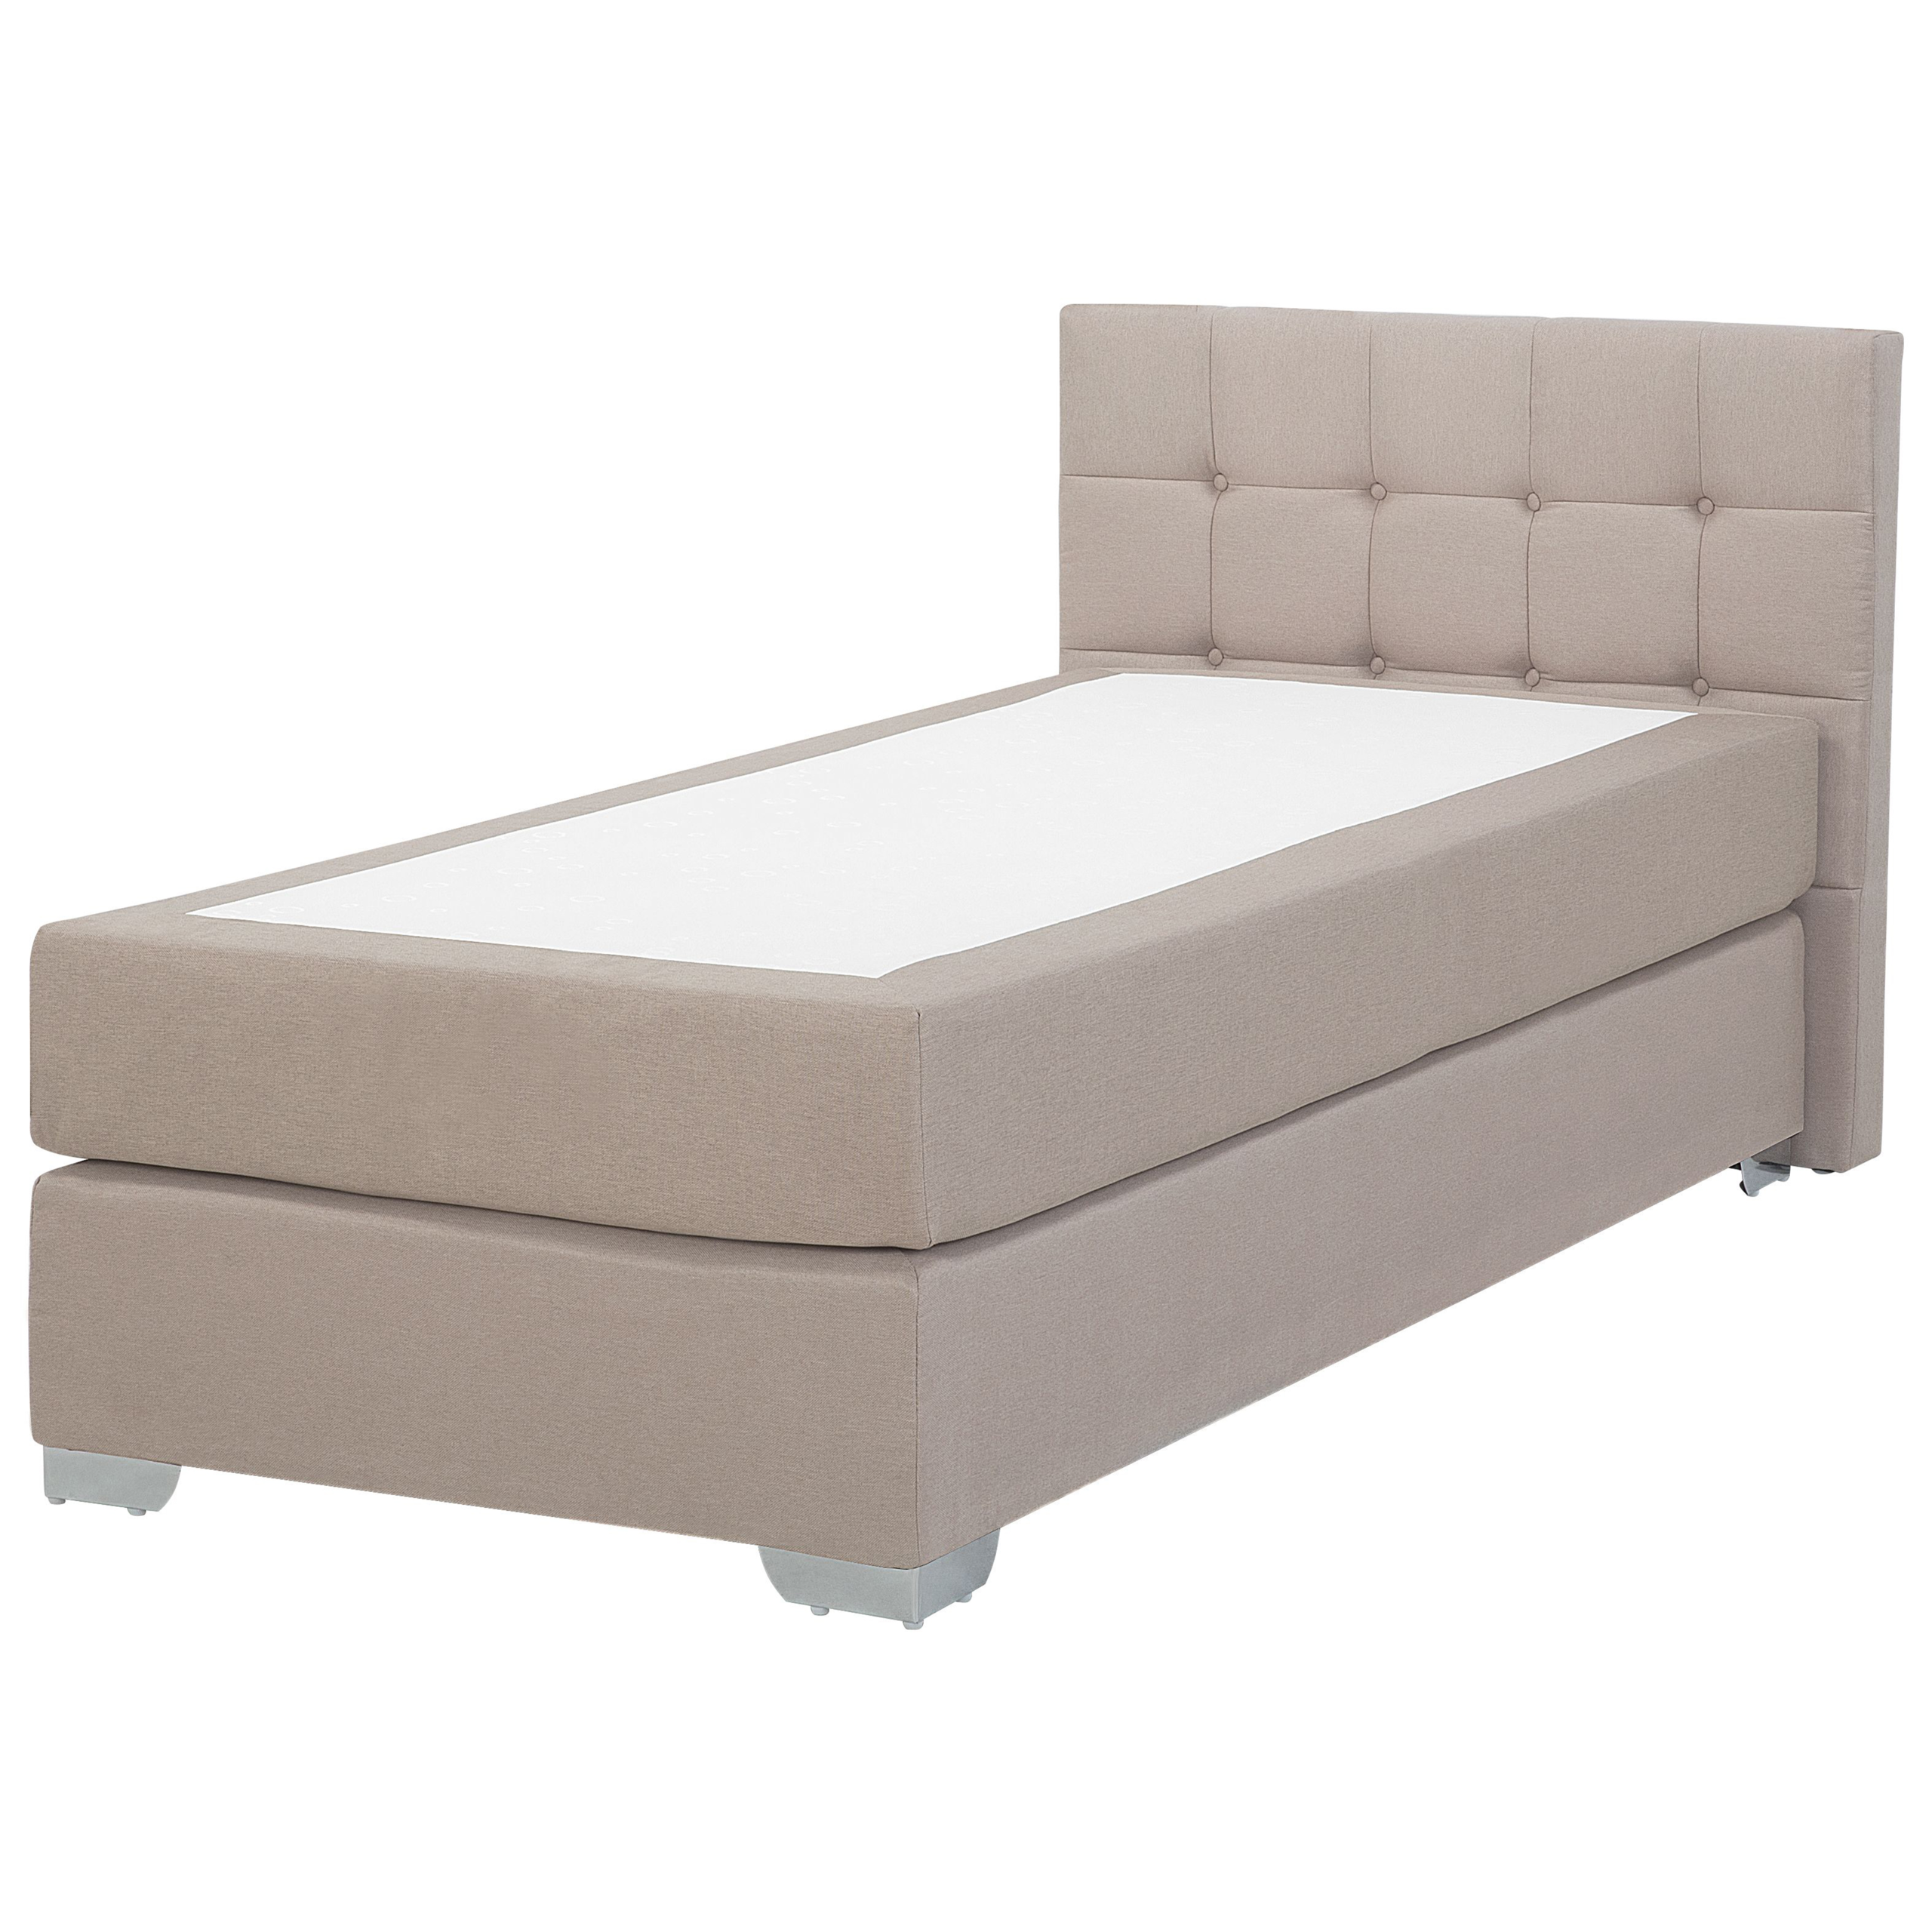 Beliani EU Single Size Continental Bed 3ft Beige Fabric with Mattress Contemporary